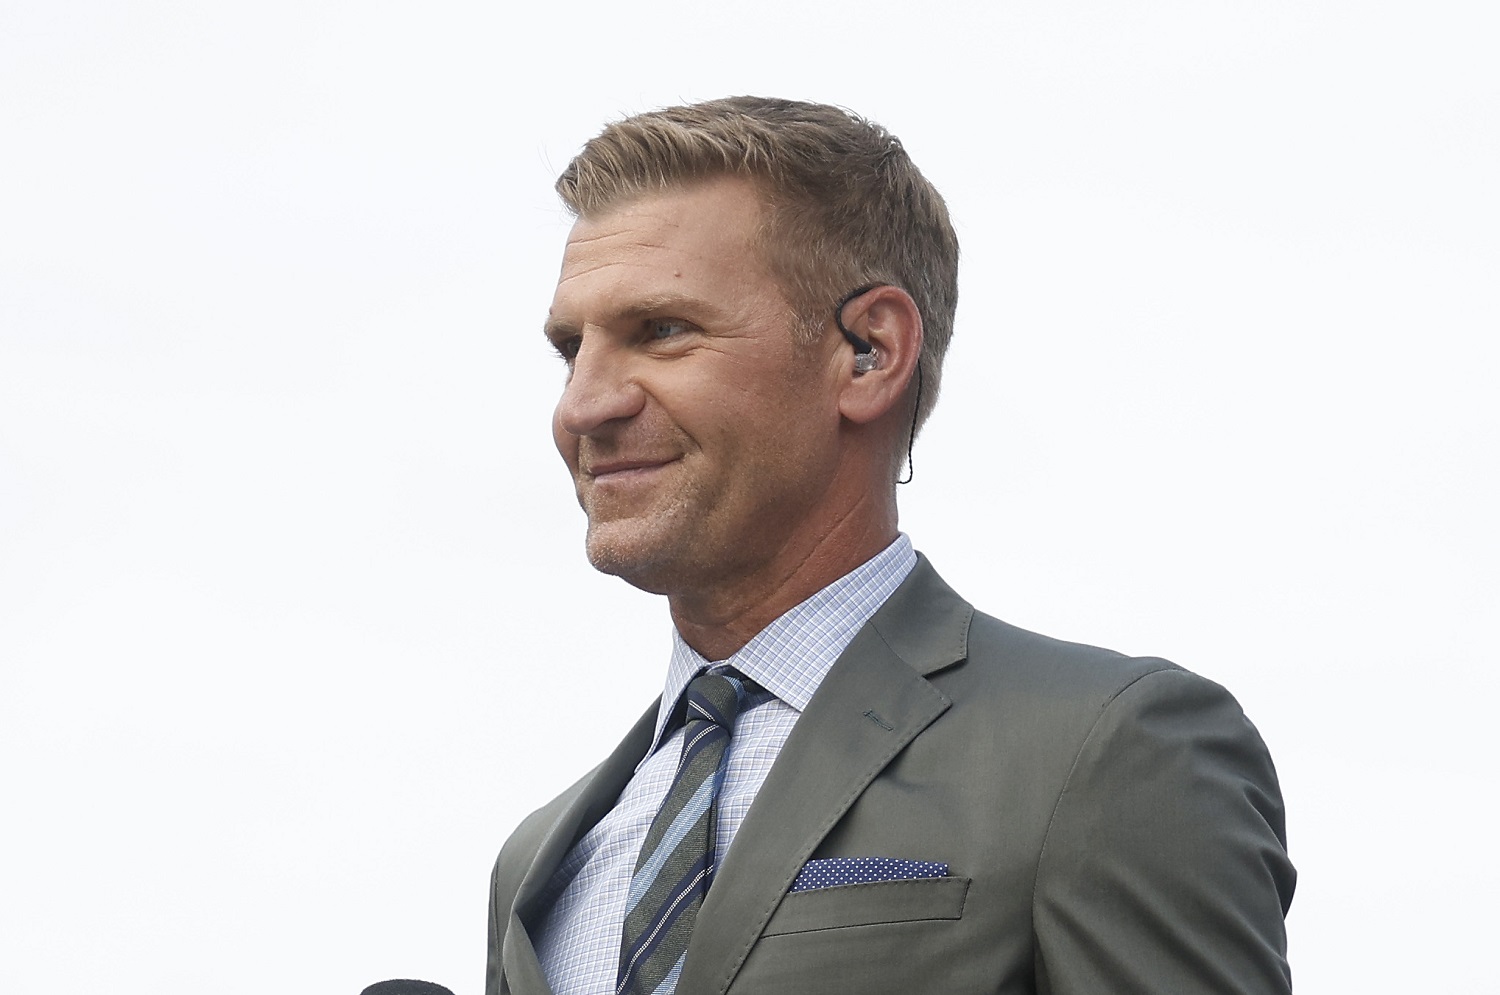 Fox Sports NASCAR broadcaster Clint Bowyer during pre-race ceremonies at the Cup Series All-Star Race at Texas Motor Speedway on May 22, 2022. | Chris Graythen/Getty Images